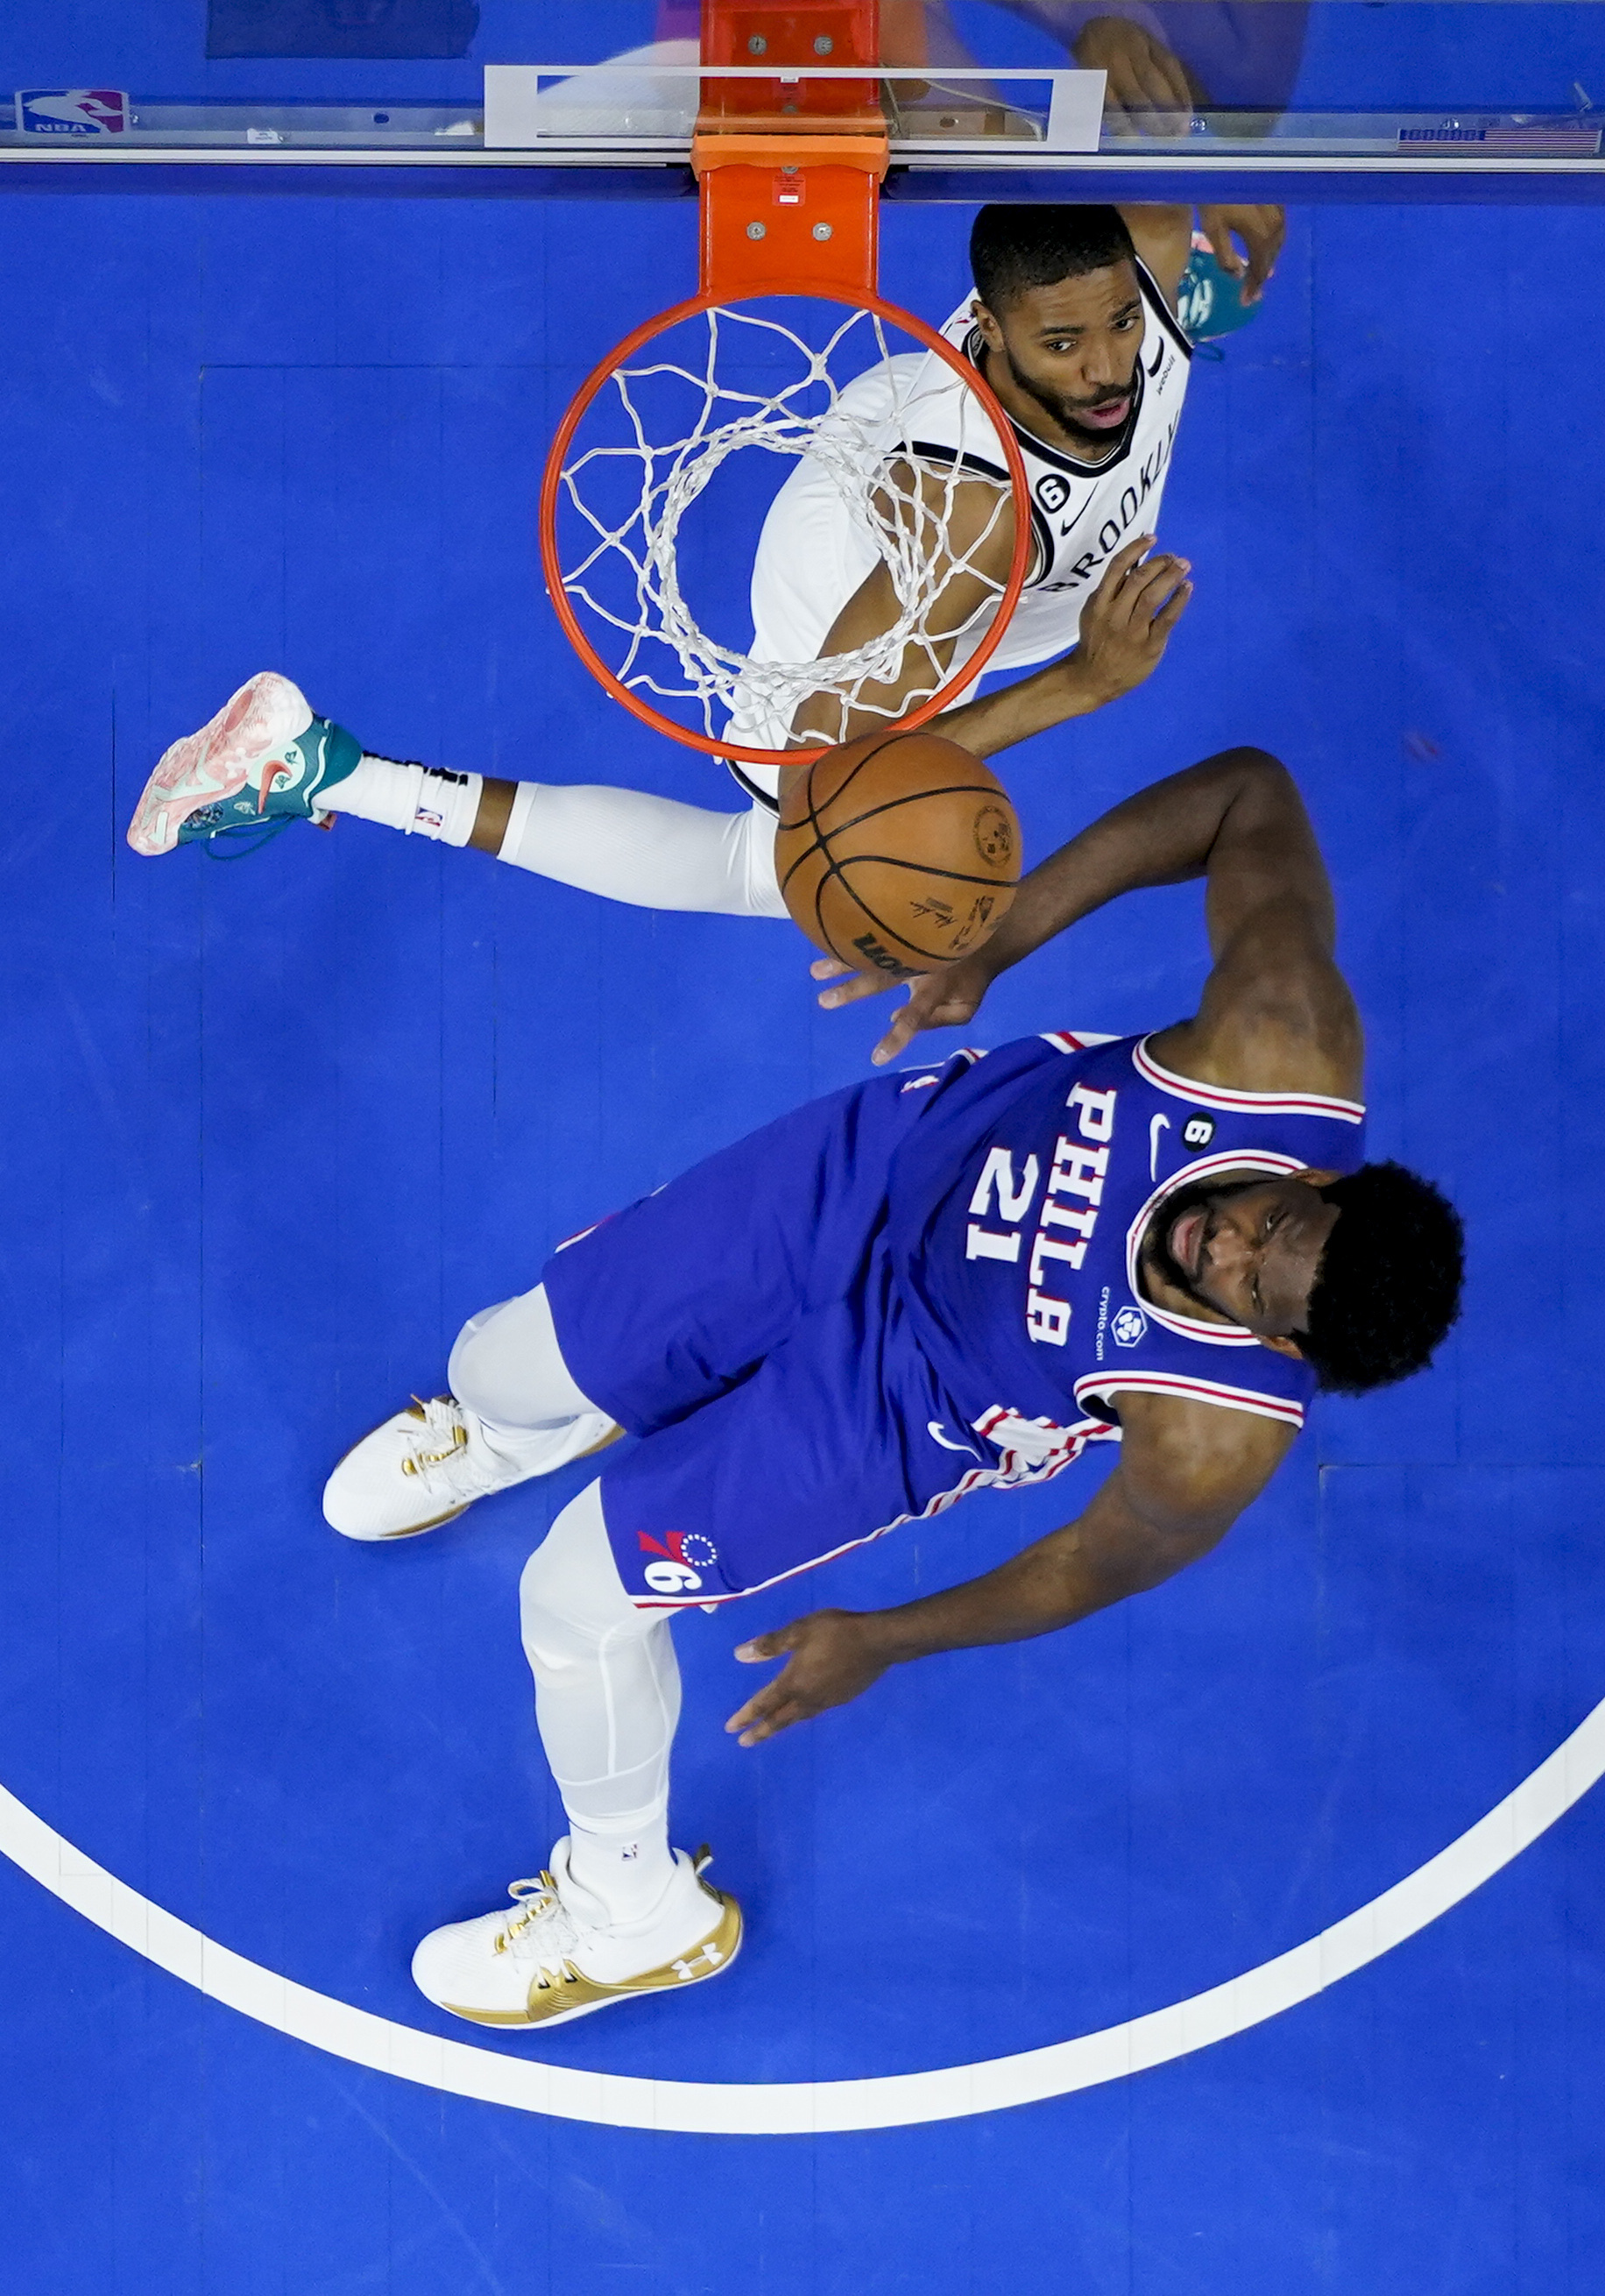 76ers counting on Maxey to form Big 3 with Harden, Embiid – Metro